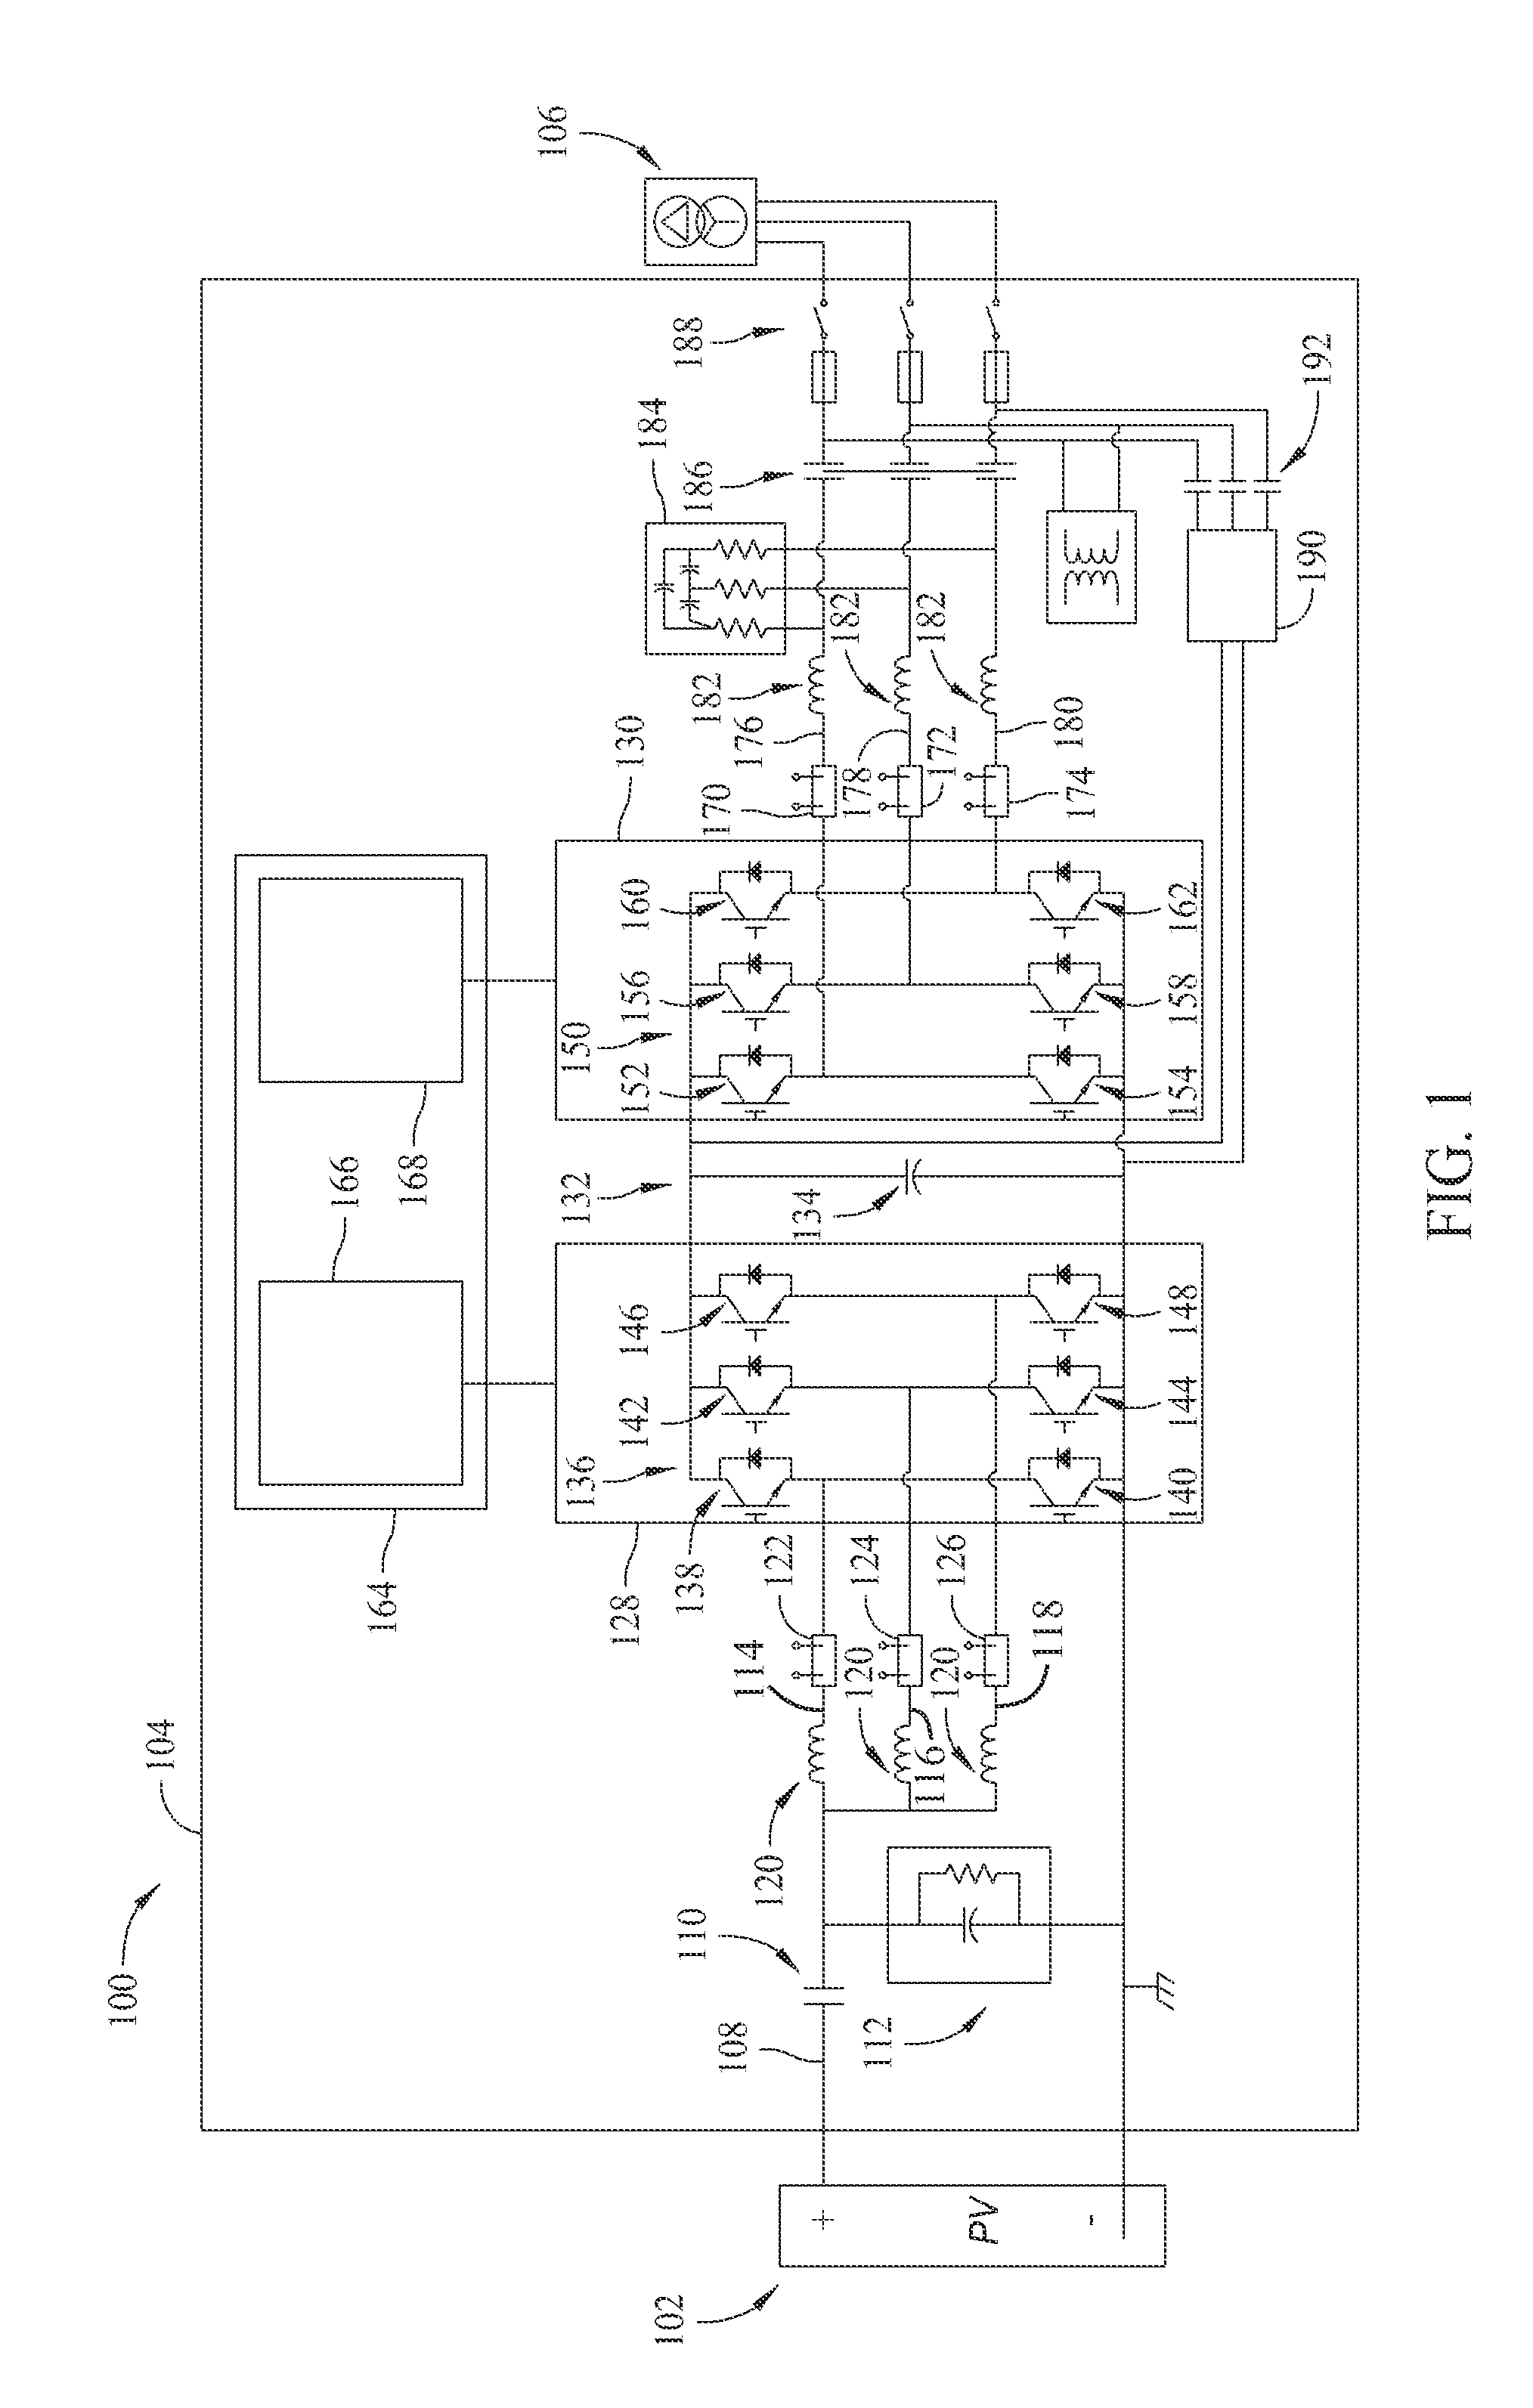 Power converter system and methods of operating a power converter system